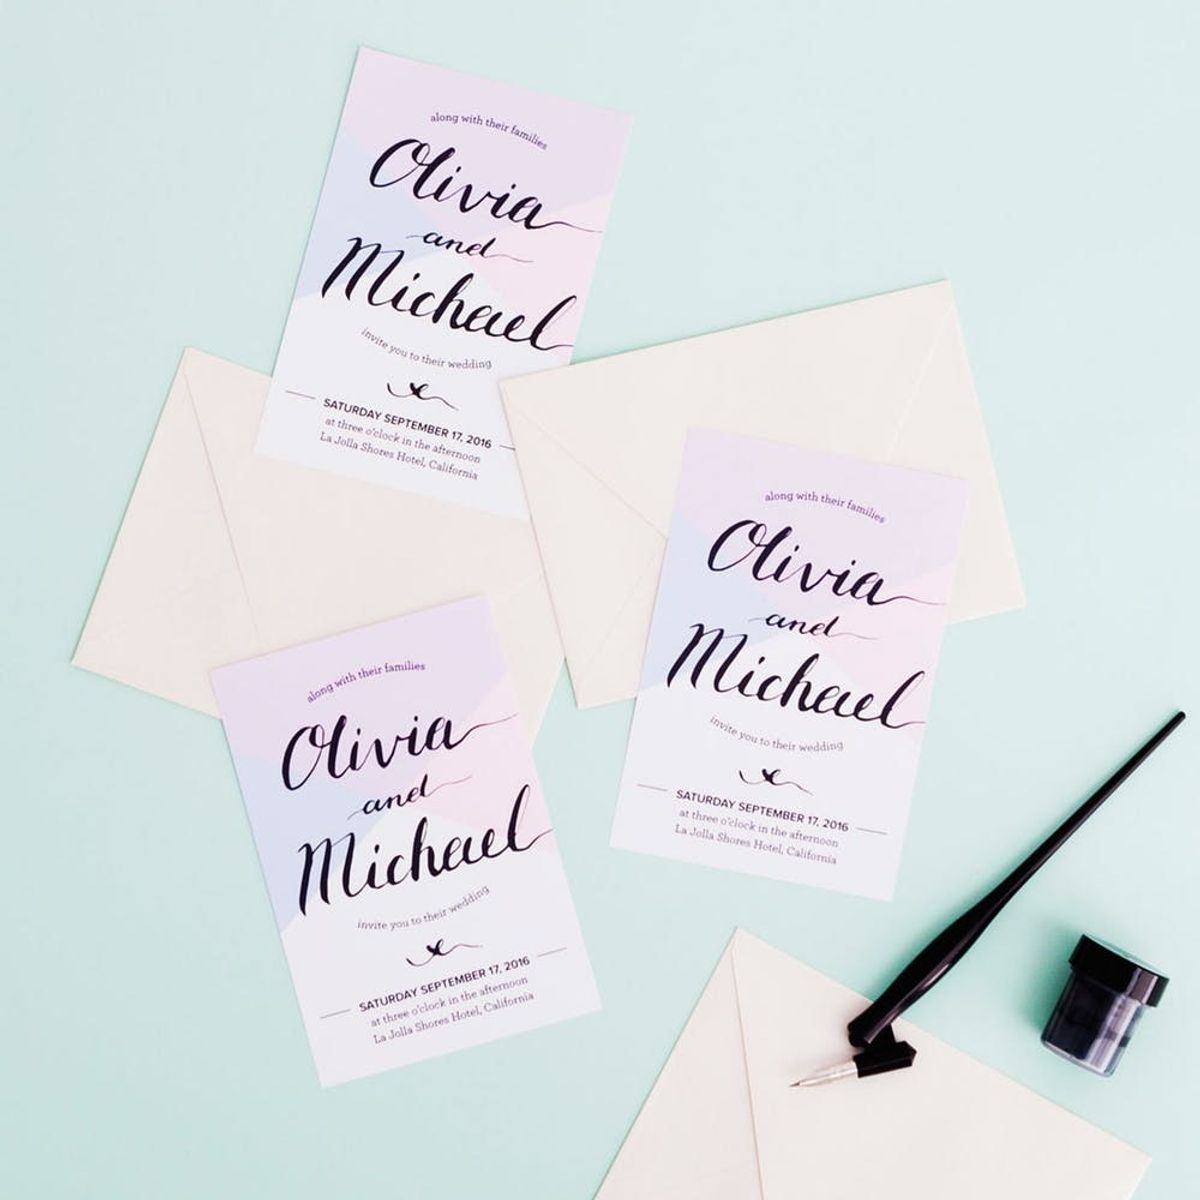 How to Create Unique Invitations With Calligraphy and Illustrator